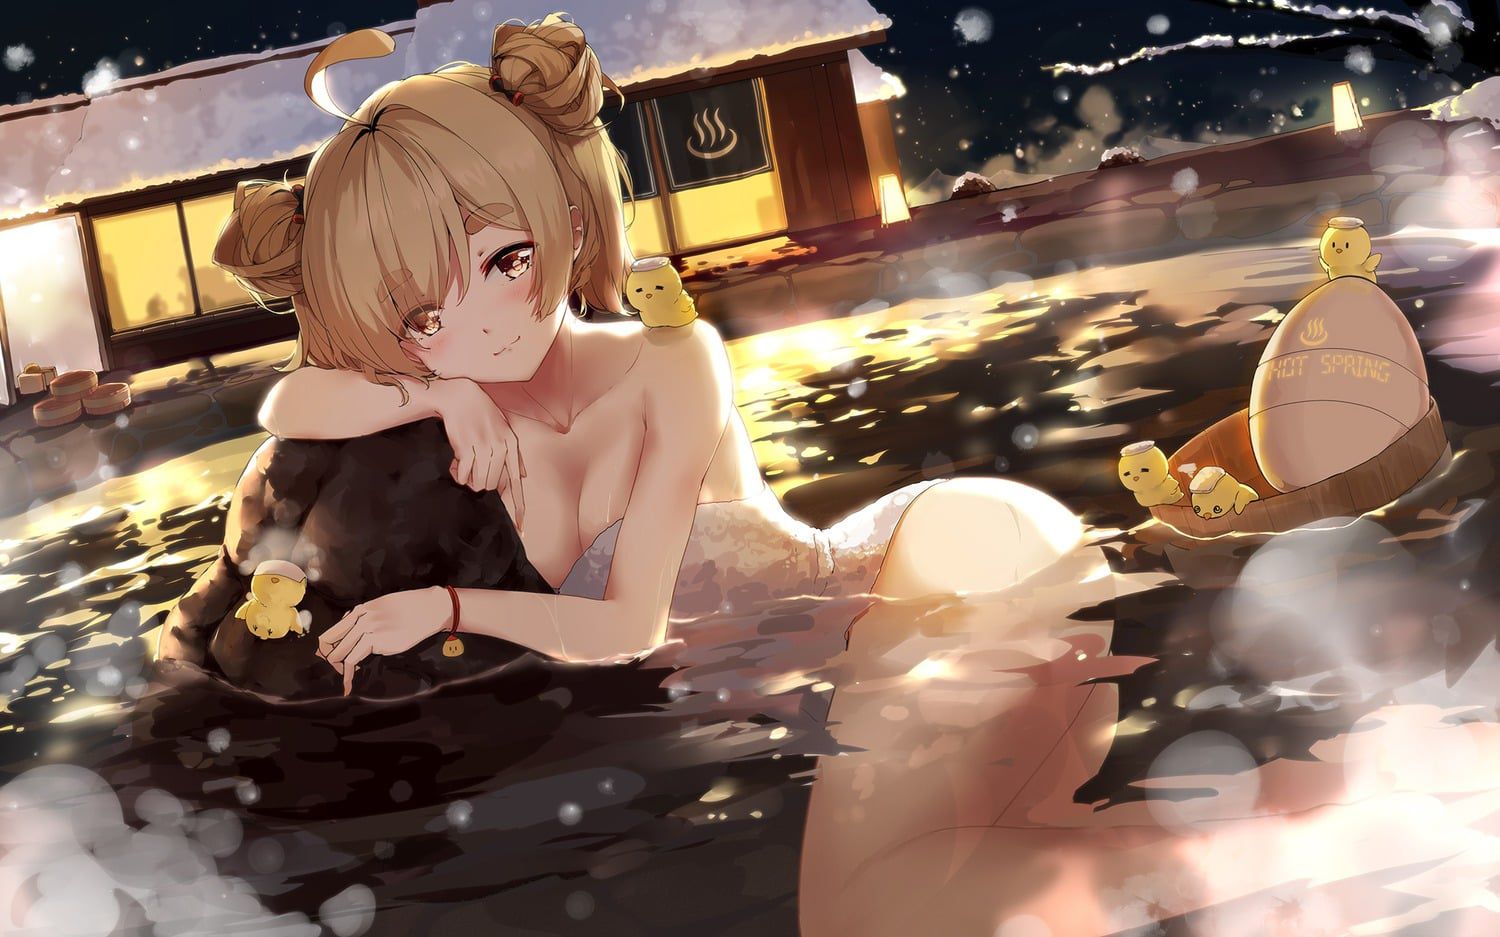 Let's gaze at the bath scene of a defenseless girl during relaxation time! 36